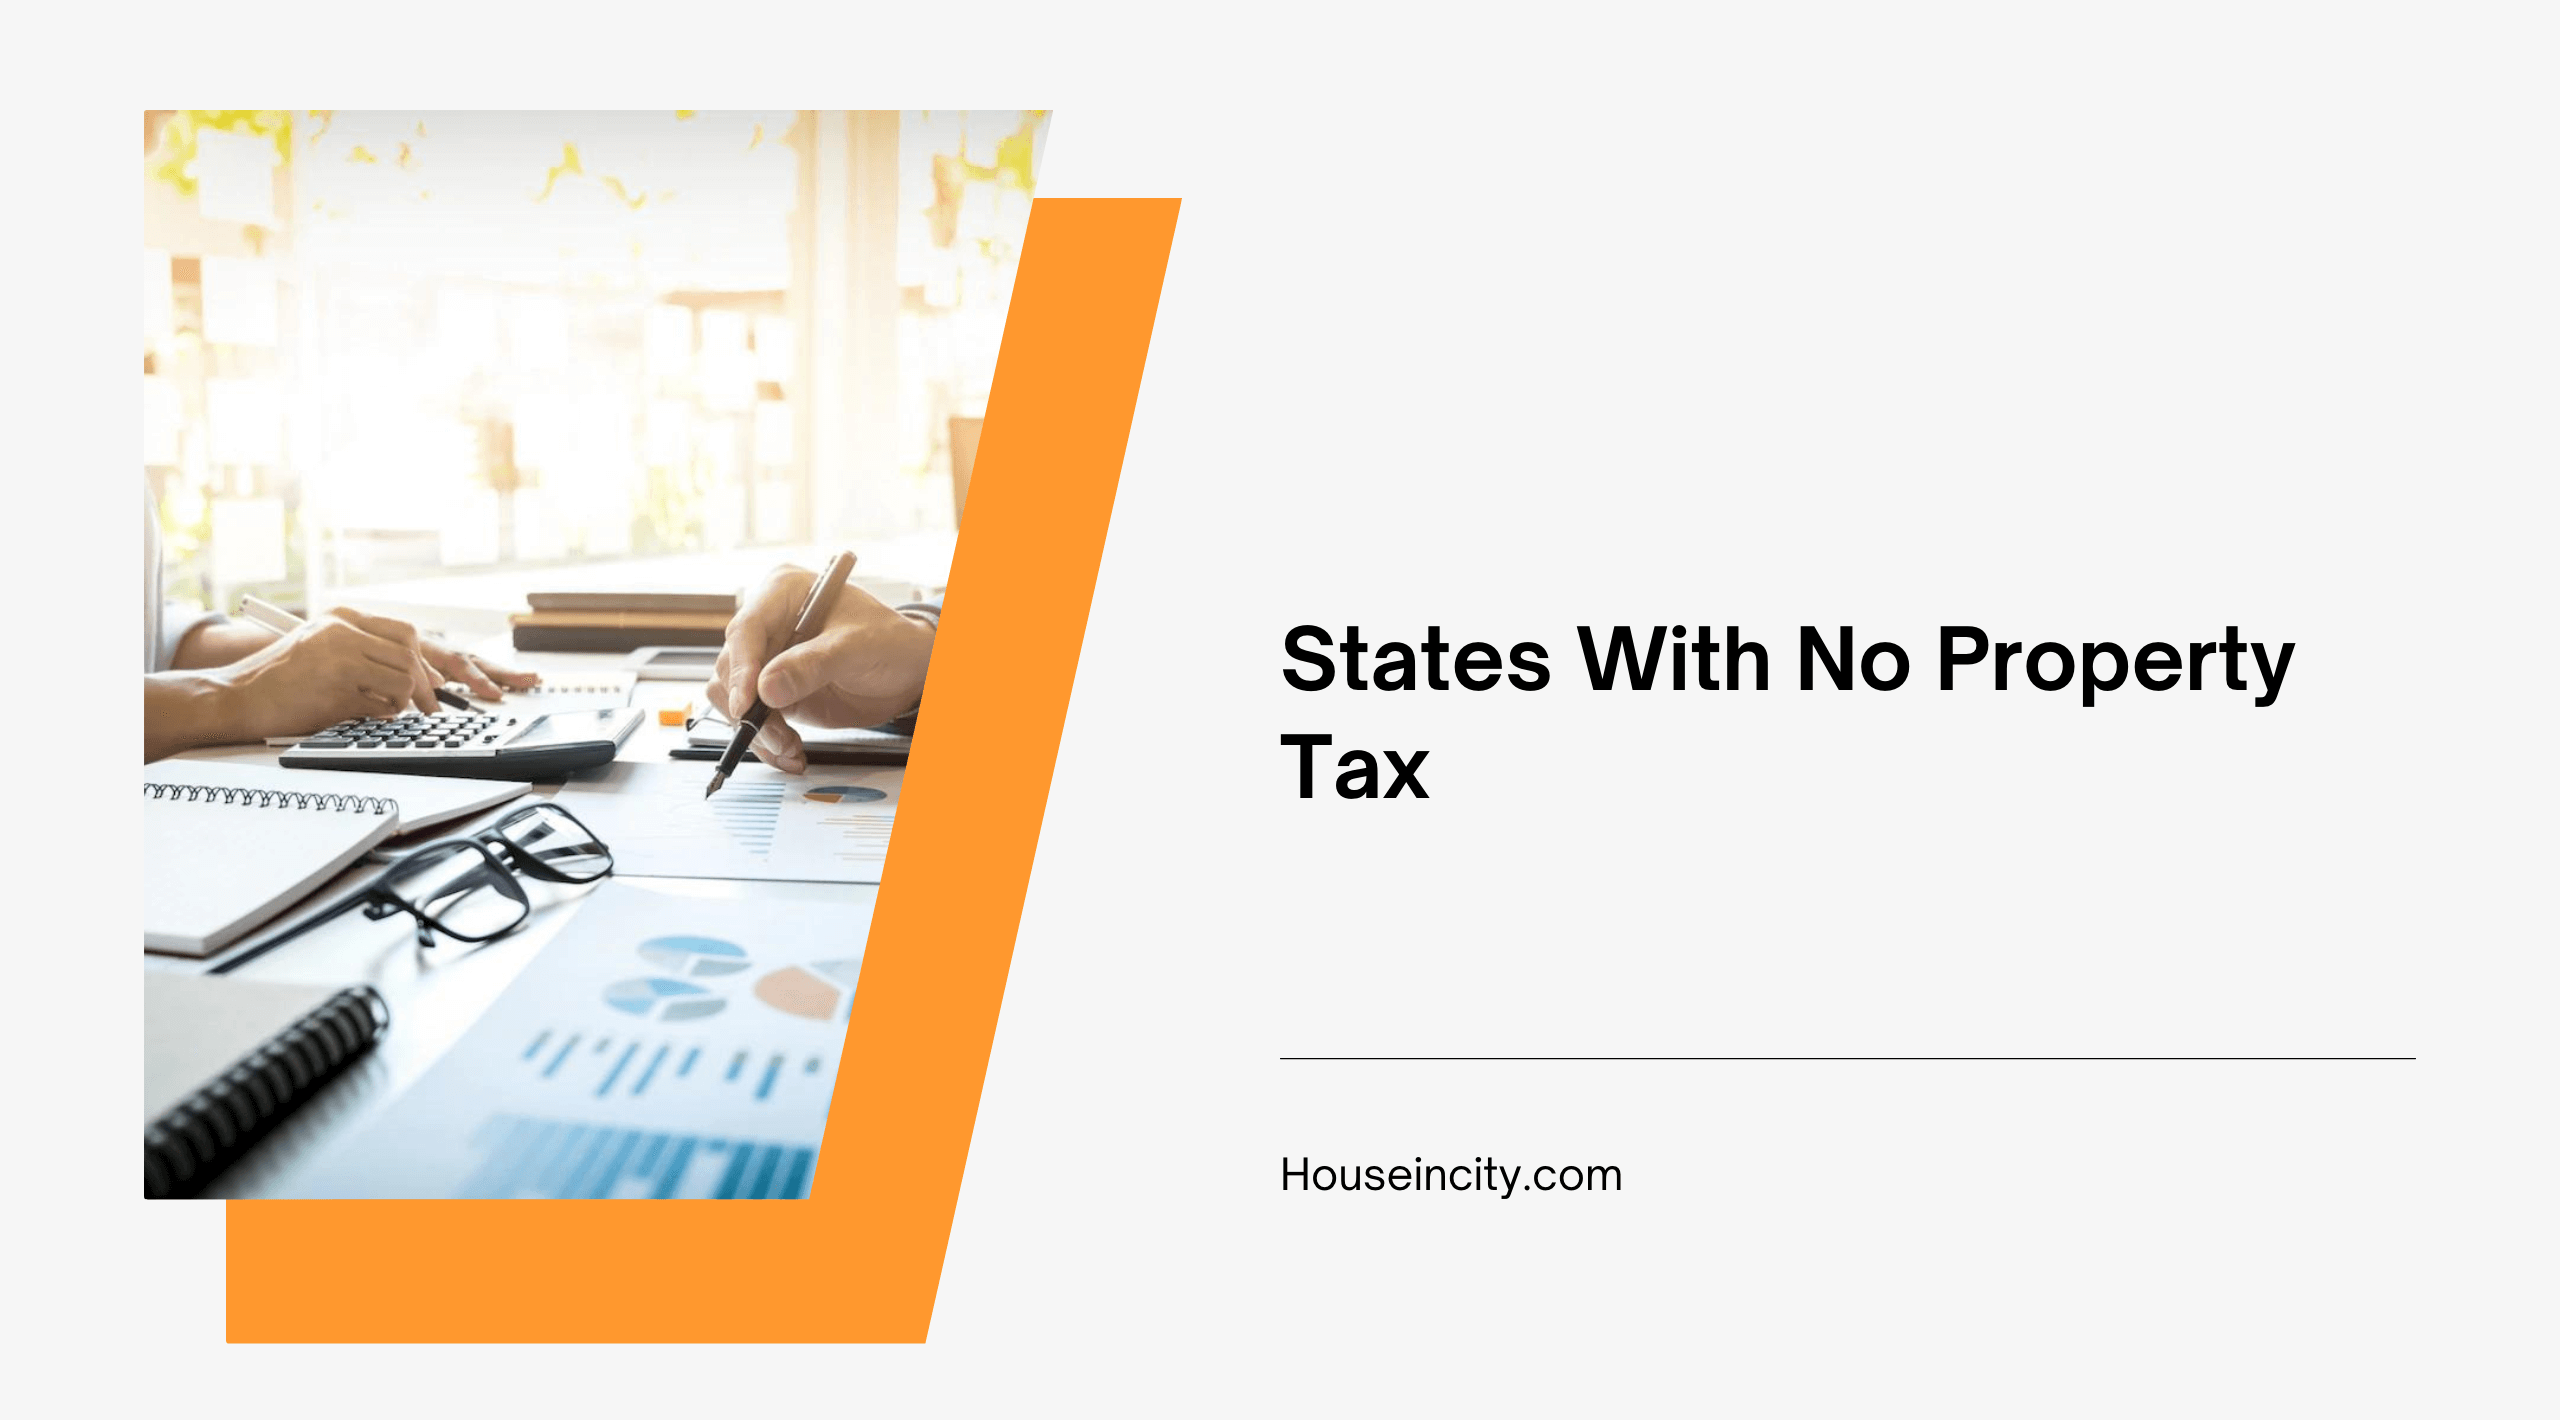 States With No Property Tax